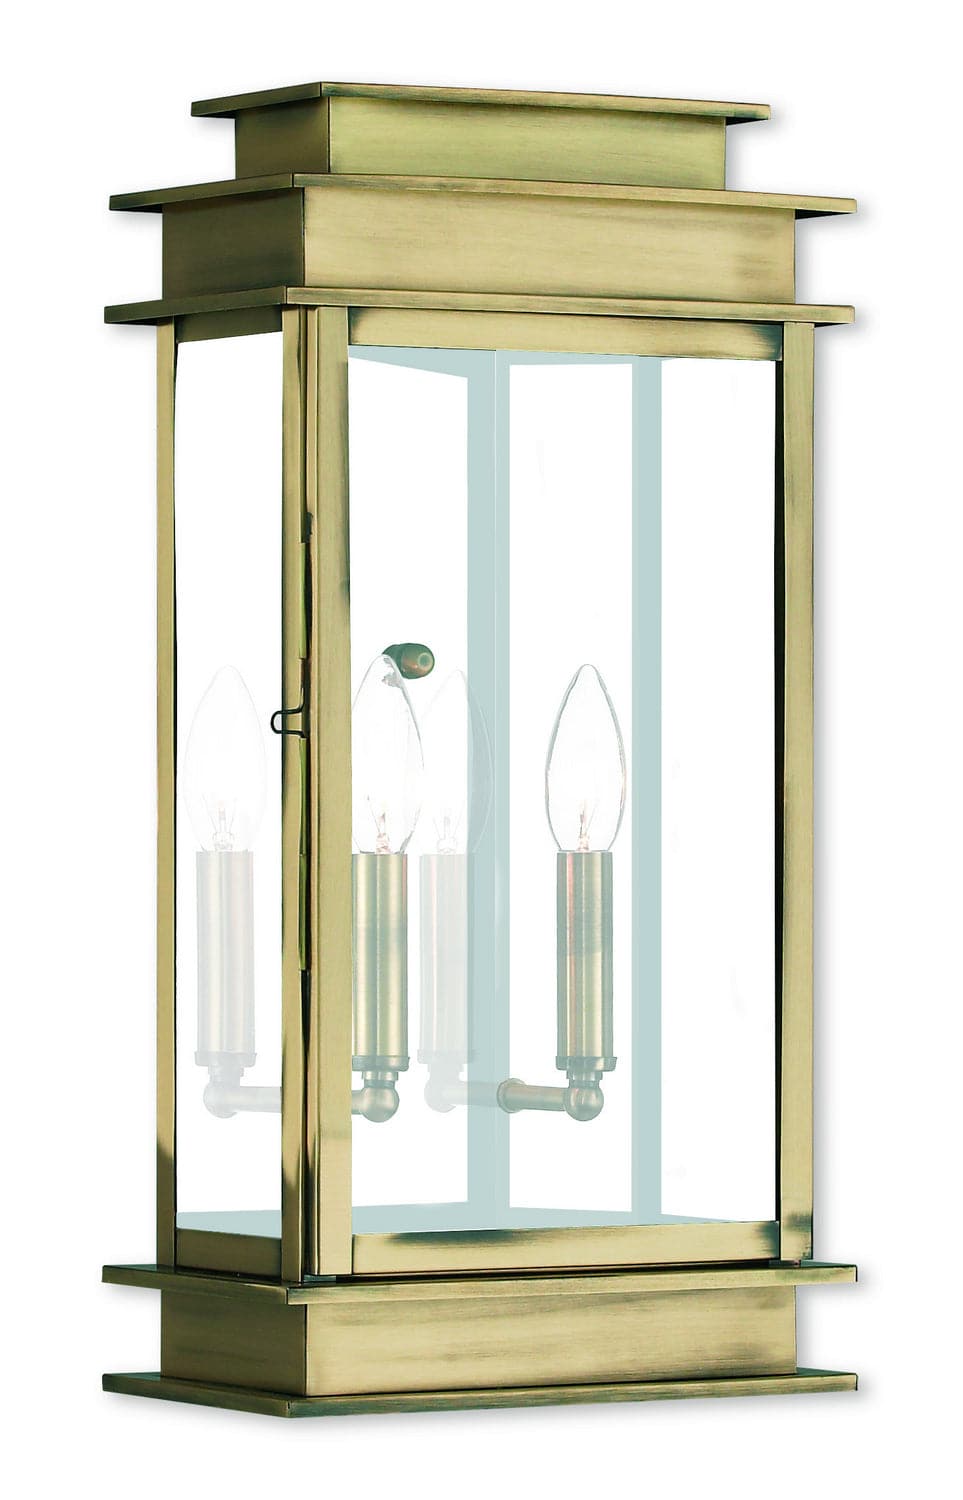 Livex Lighting - 2018-01 - Two Light Outdoor Wall Lantern - Princeton - Antique Brass w/ Polished Chrome Stainless Steel